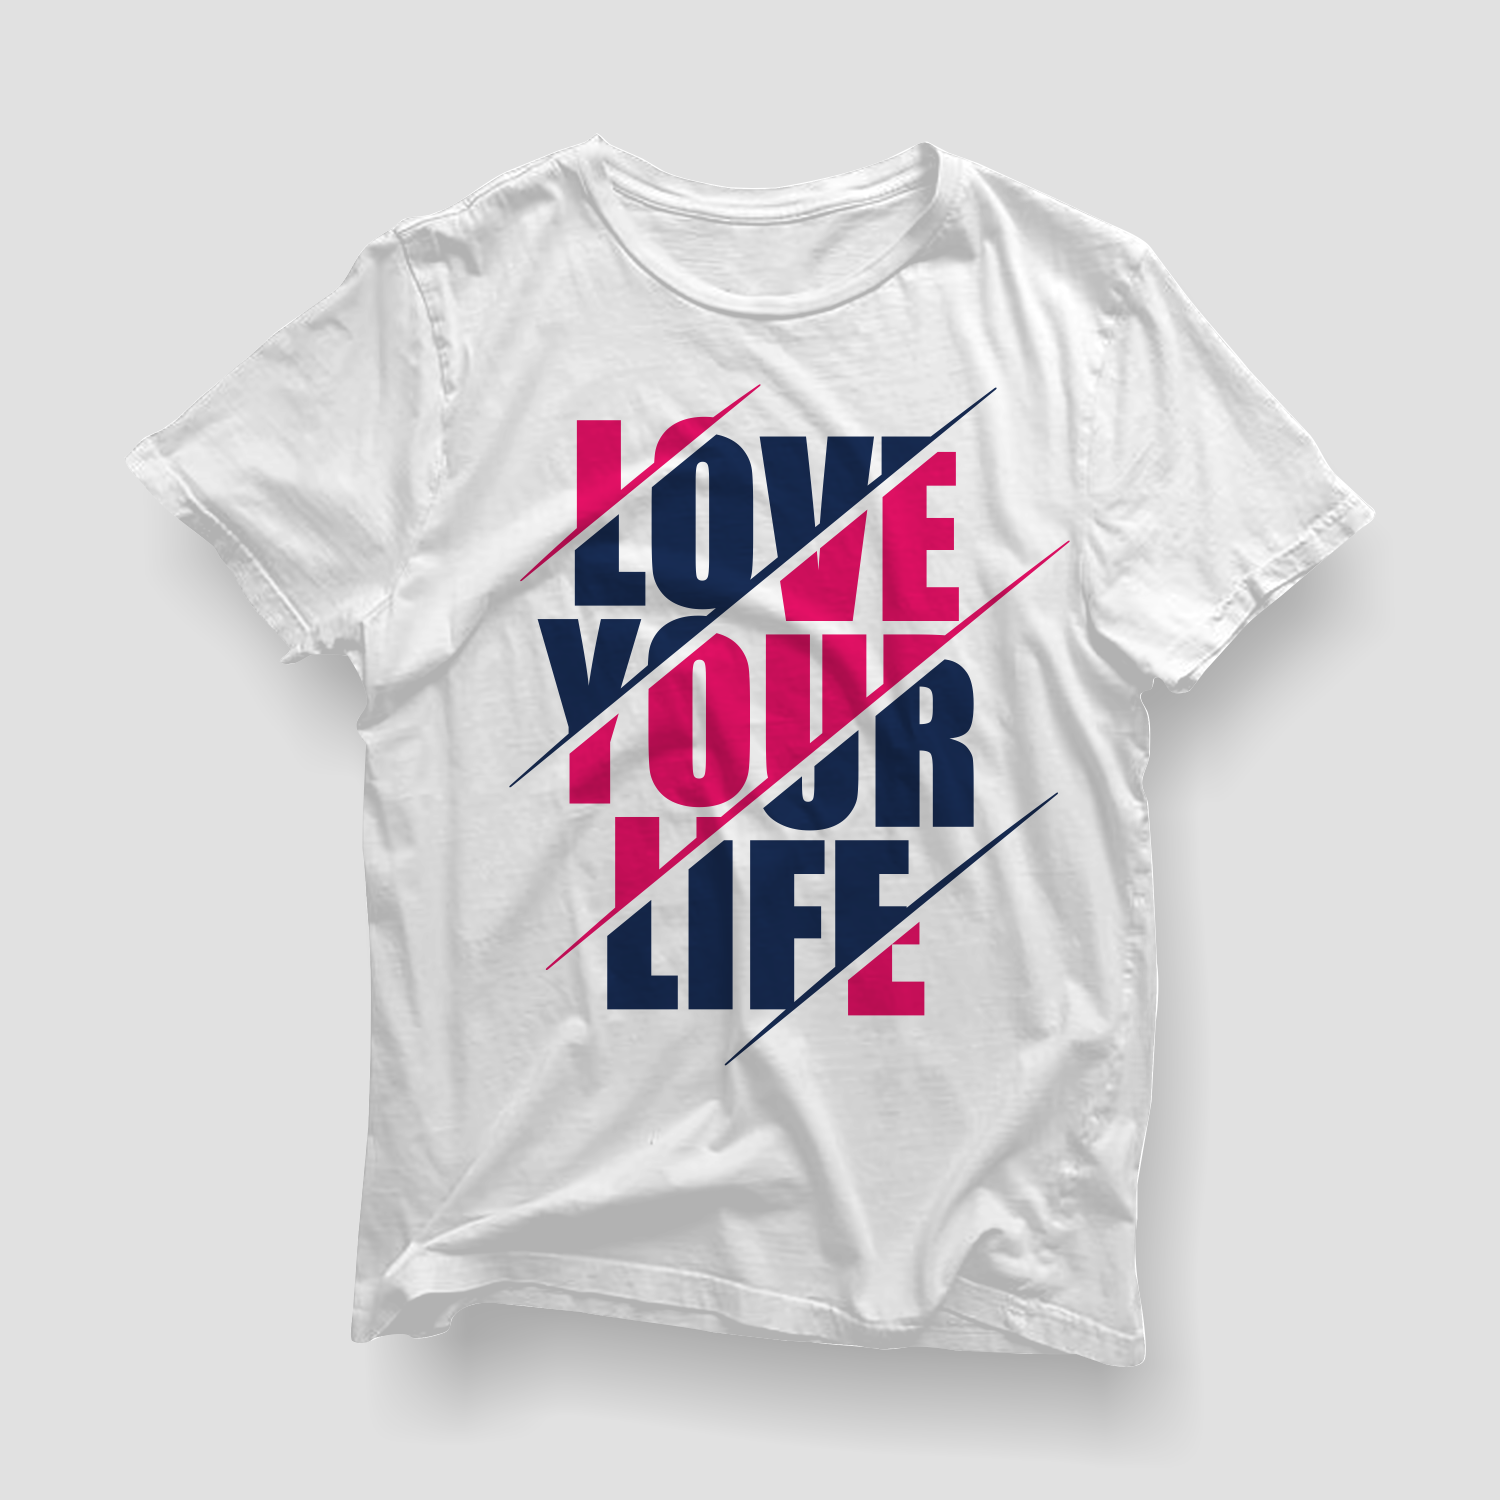 Love Your Life - Lettering Typography T-shirt Design